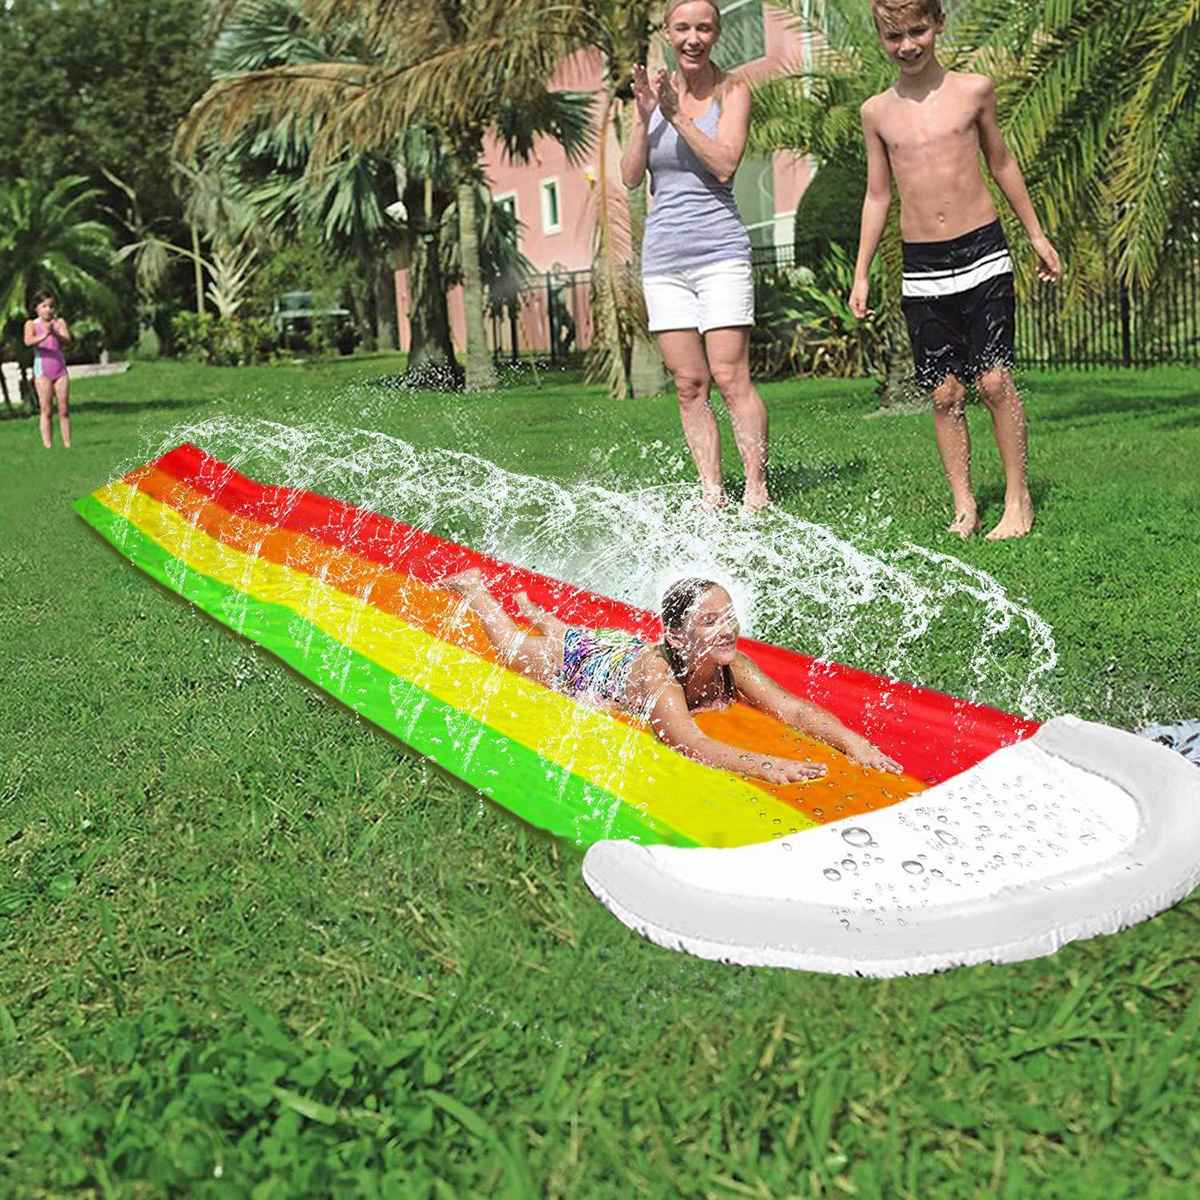 NEW-Giant-Surf-Water-Slide-Fun-Lawn-Water-Slides-Pools-For-Kids-Summer-PVC-Games-Center-1.jpg